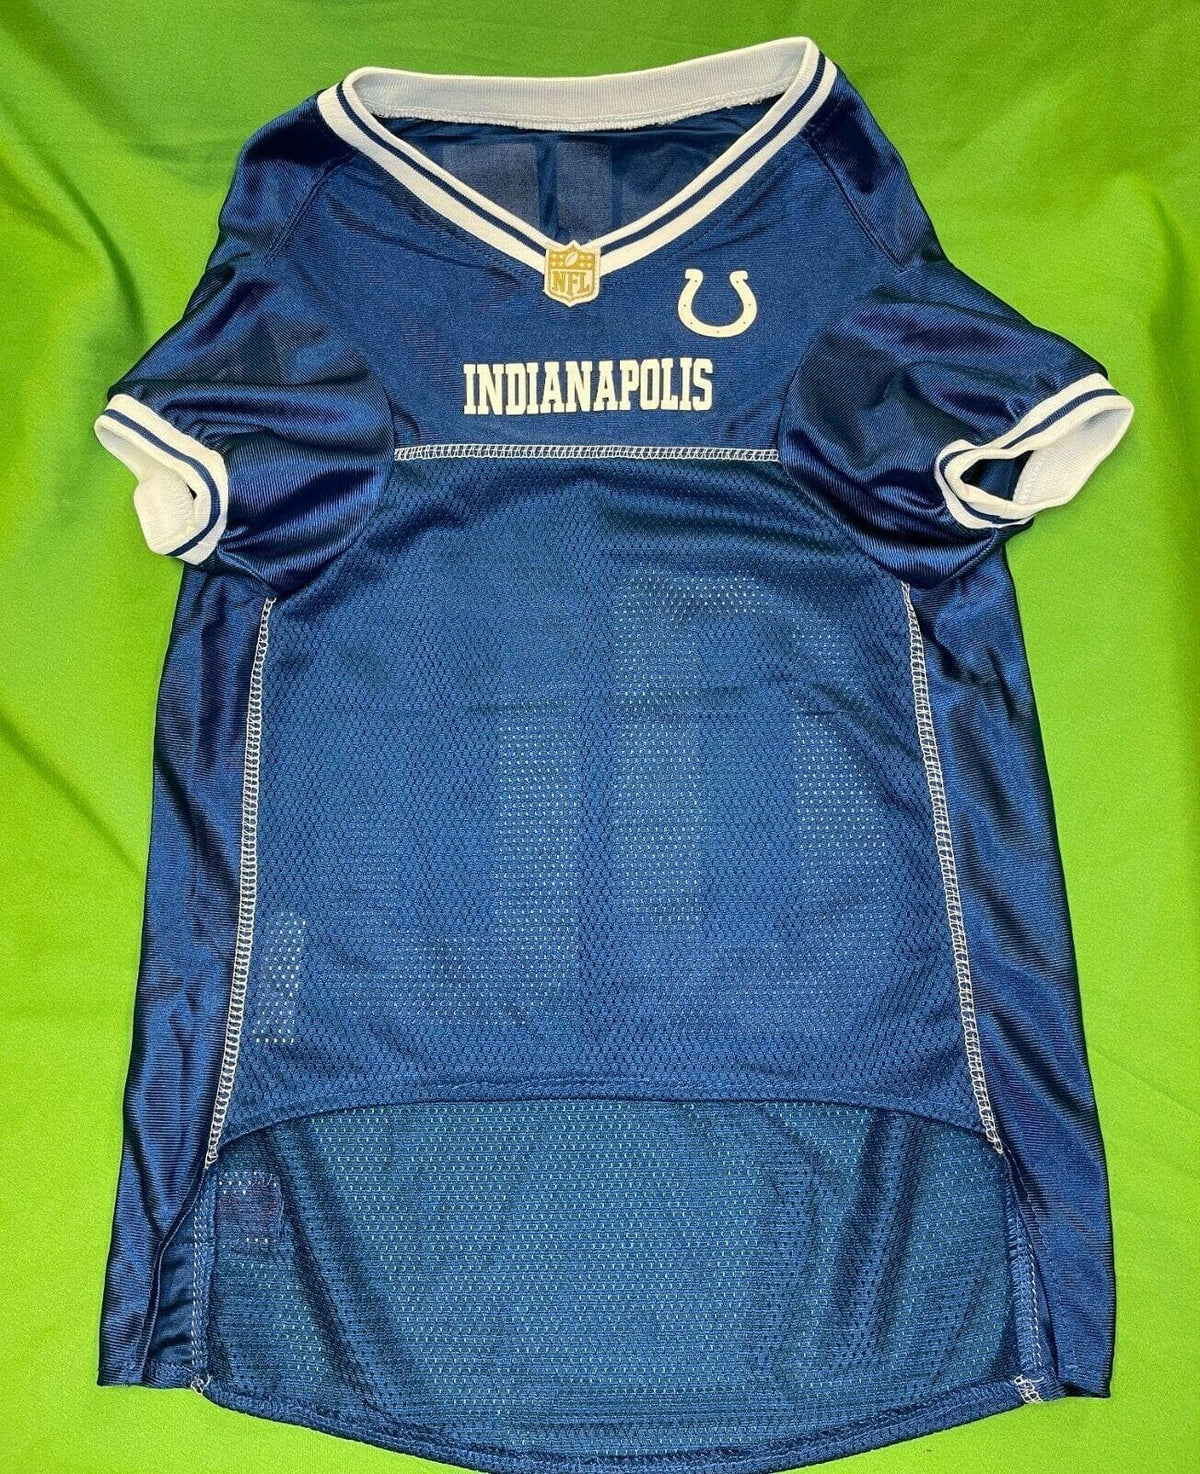 NFL Indianapolis Colts #00 Dog Jersey Size 2X-Large